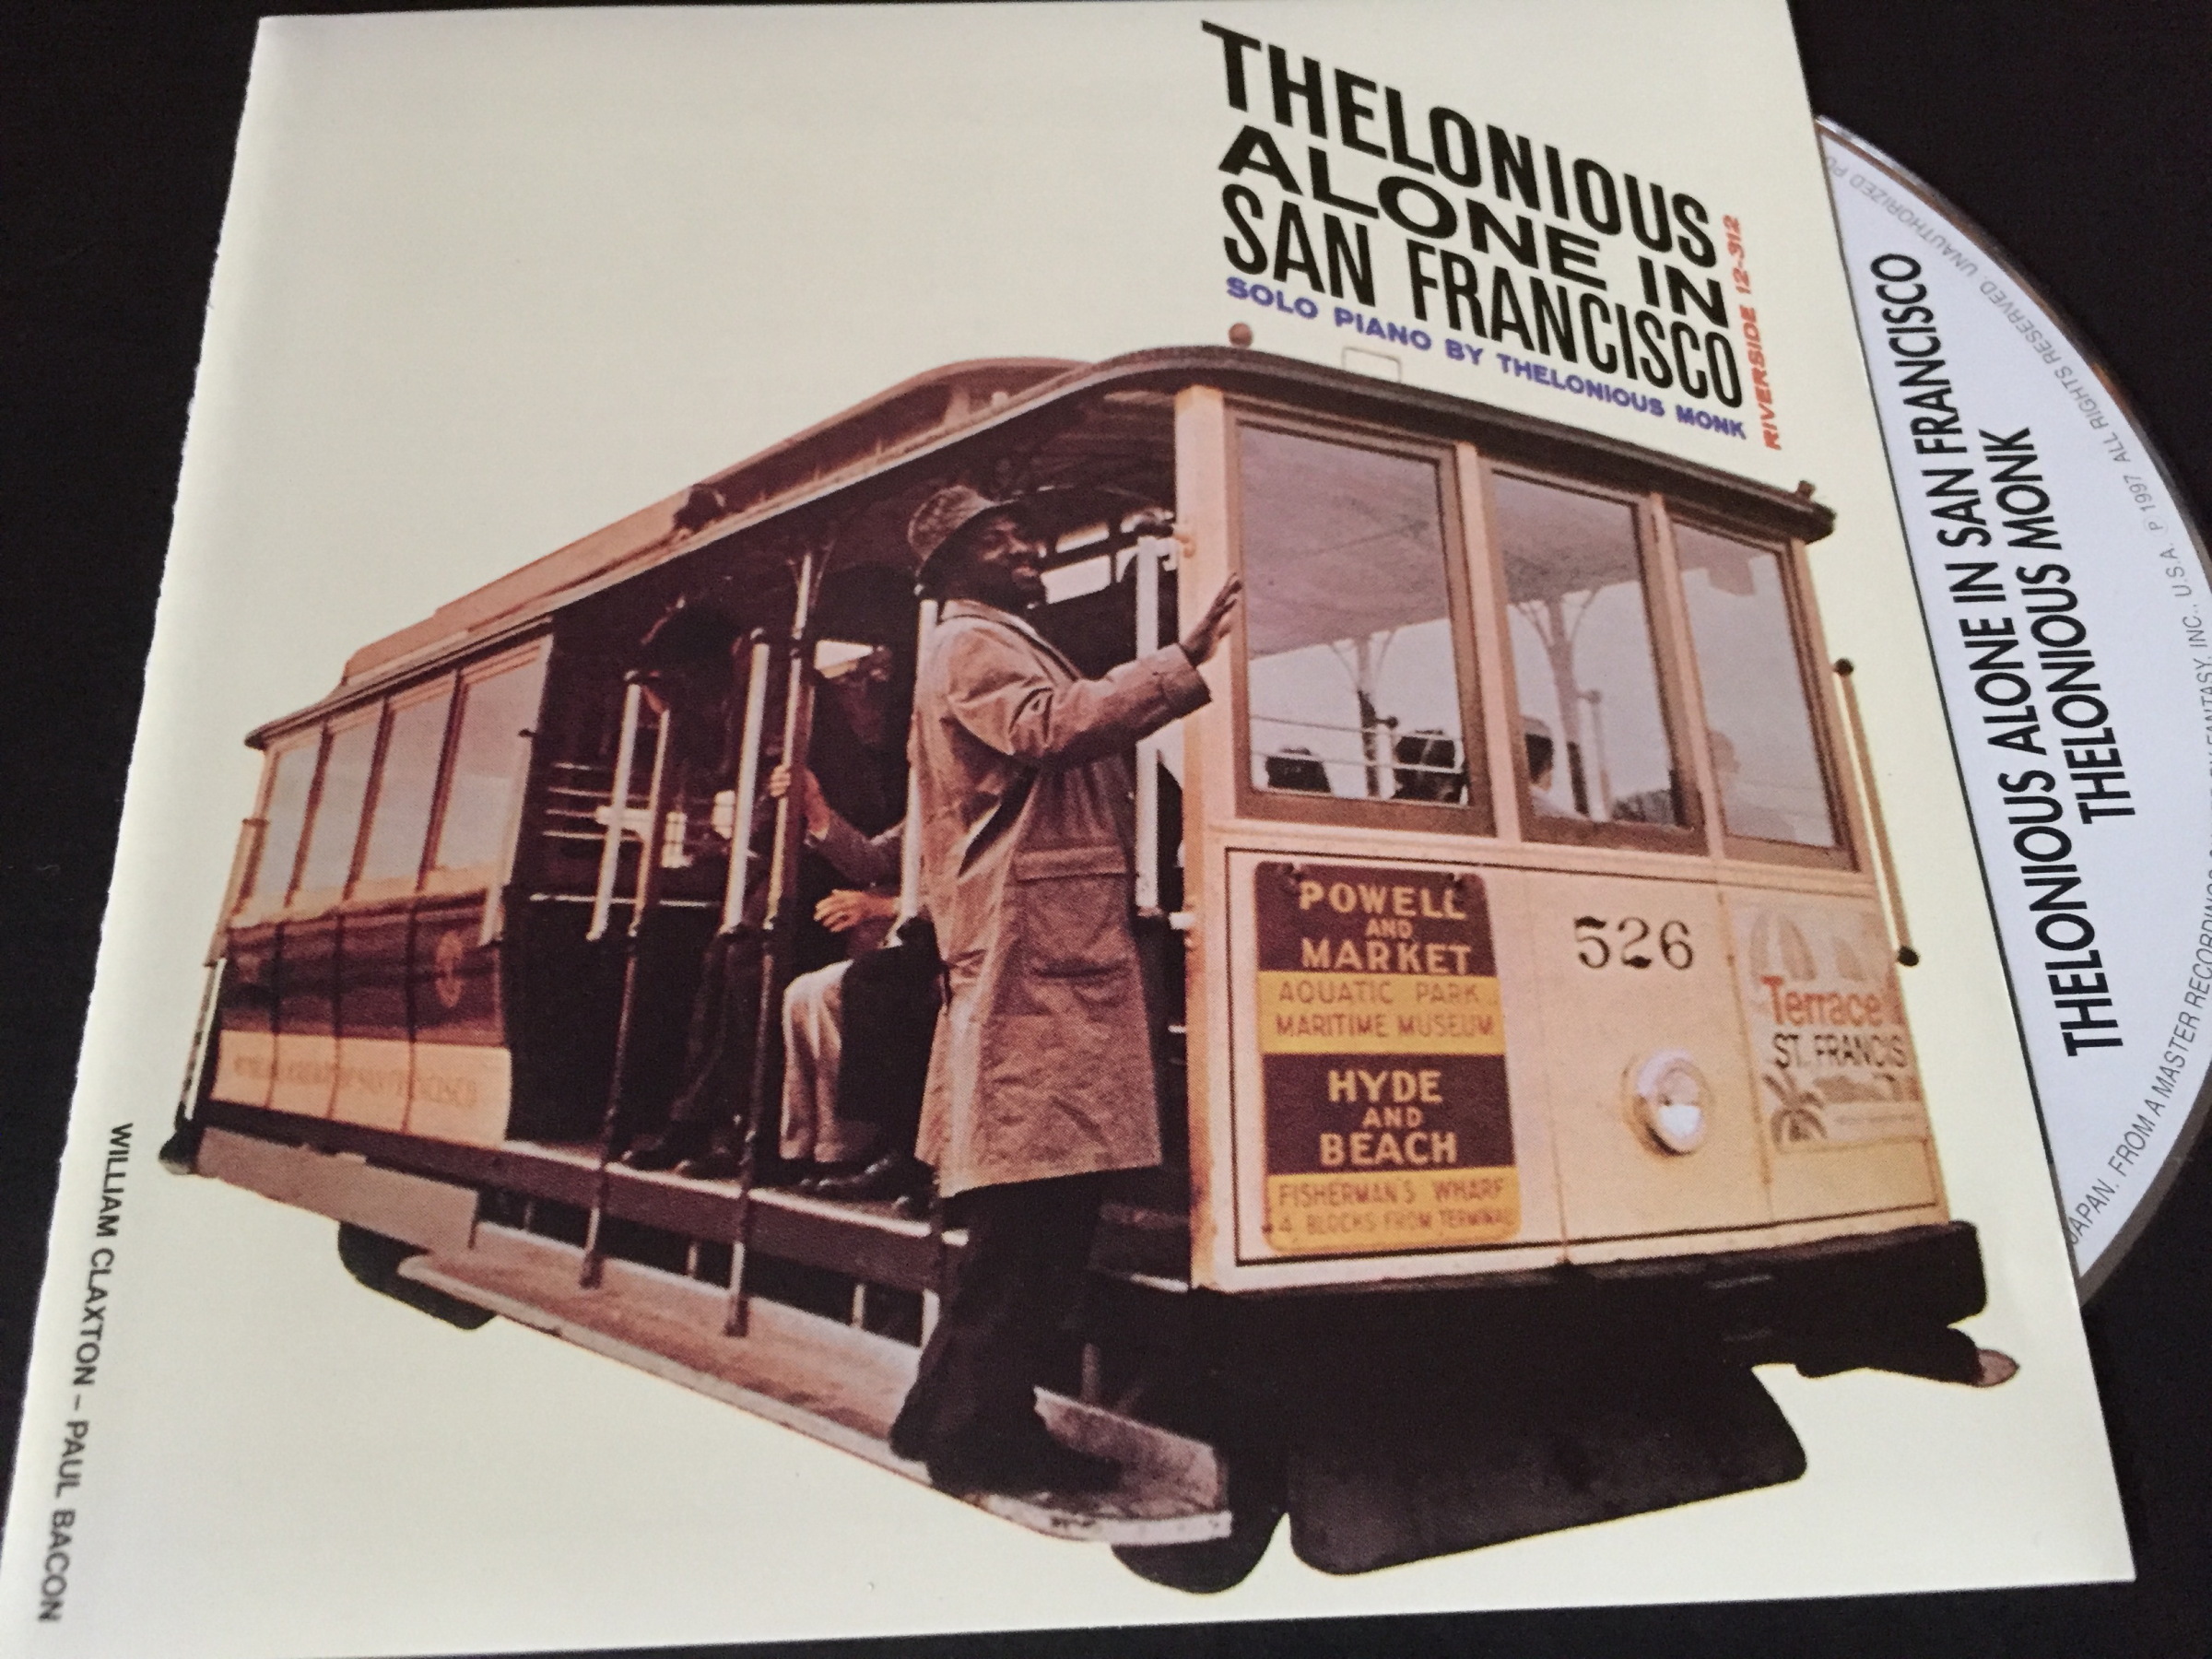 Thelonious Monk / Thelonious Alone In San Francisco: 日々JAZZ的な生活